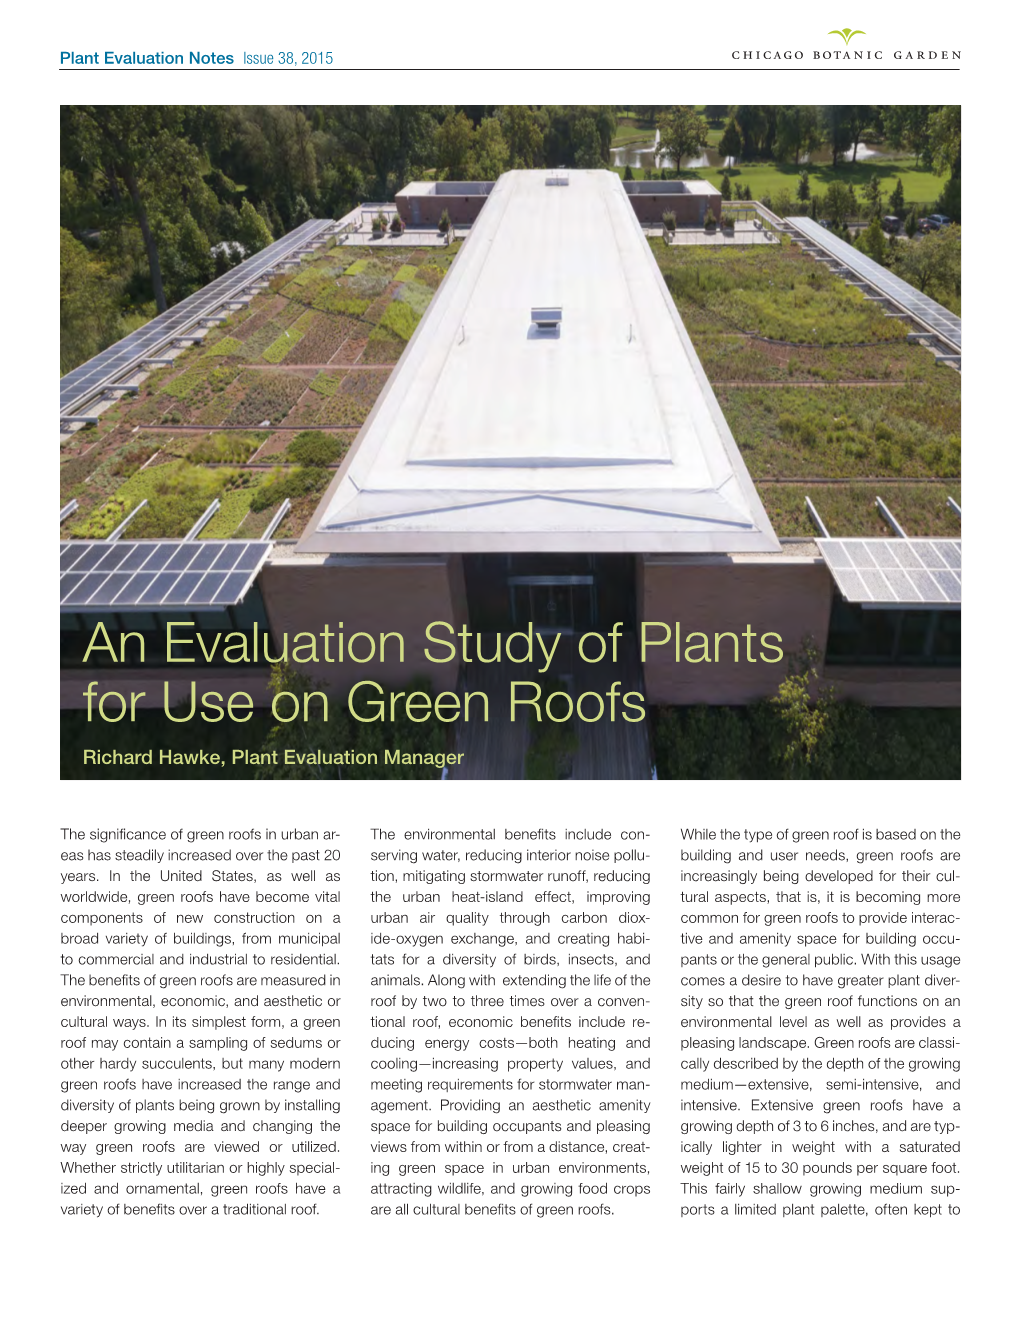 An Evaluation Study of Plants for Use on Green Roofs Richard Hawke, Plant Evaluation Manager